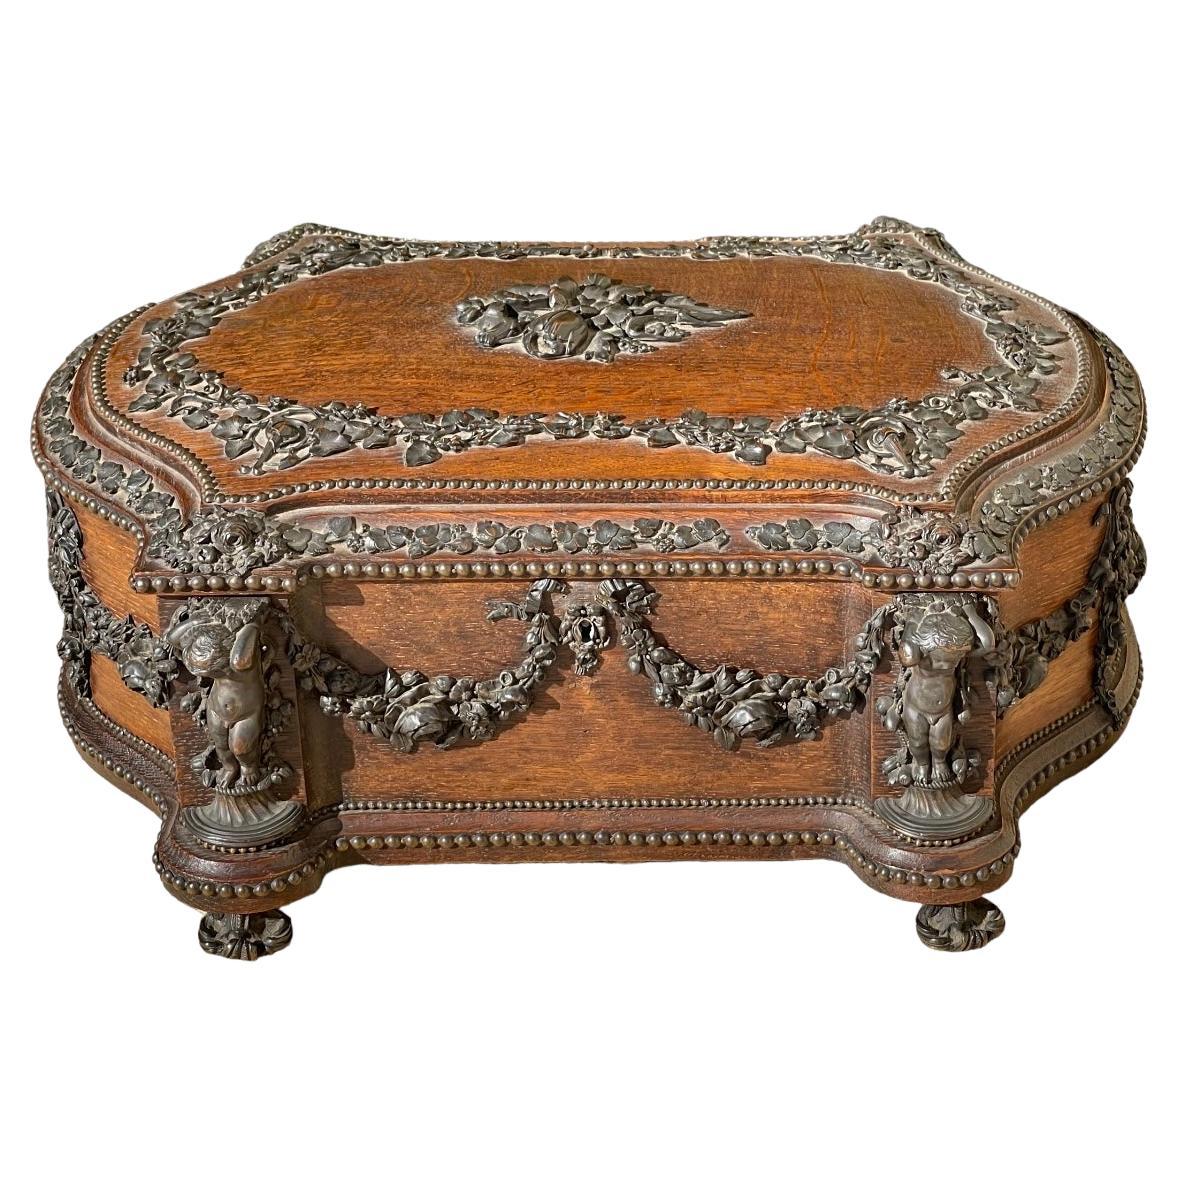 Maison TAHAN - Large Carved Wooden Box And Bronze Garlands